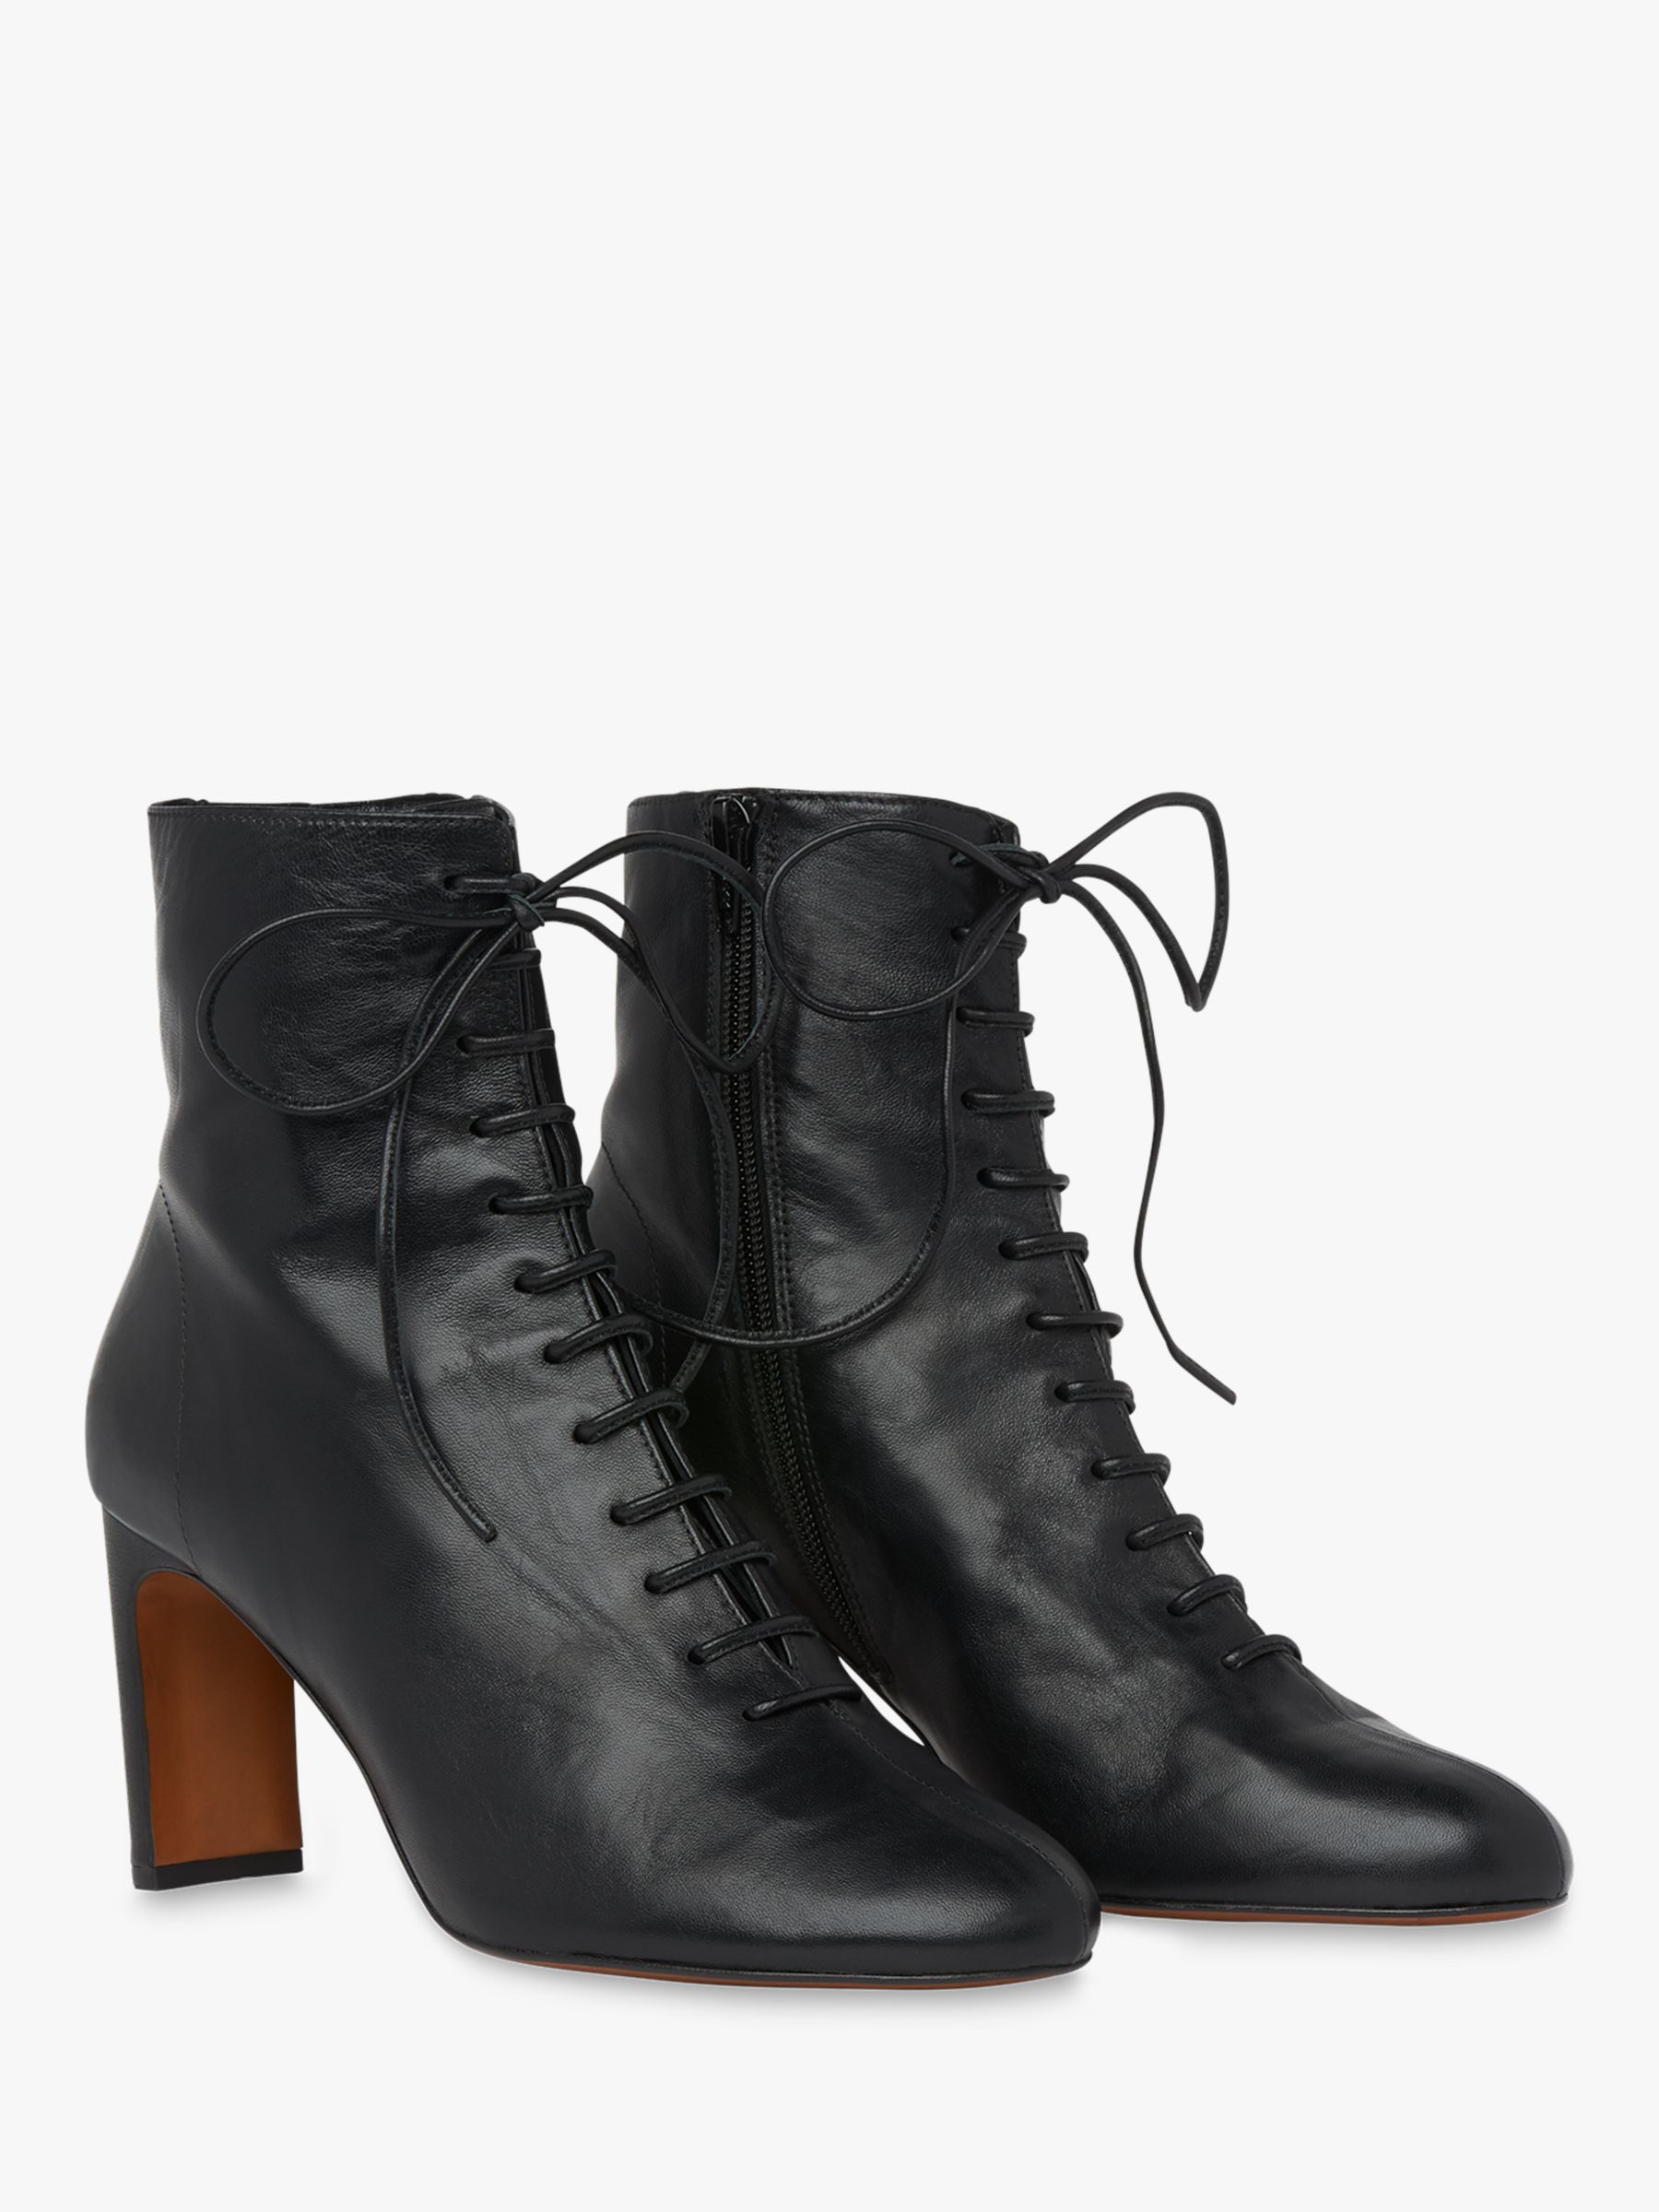 Whistles Dahlia Leather Lace Up Ankle Boots, Black at John Lewis & Partners